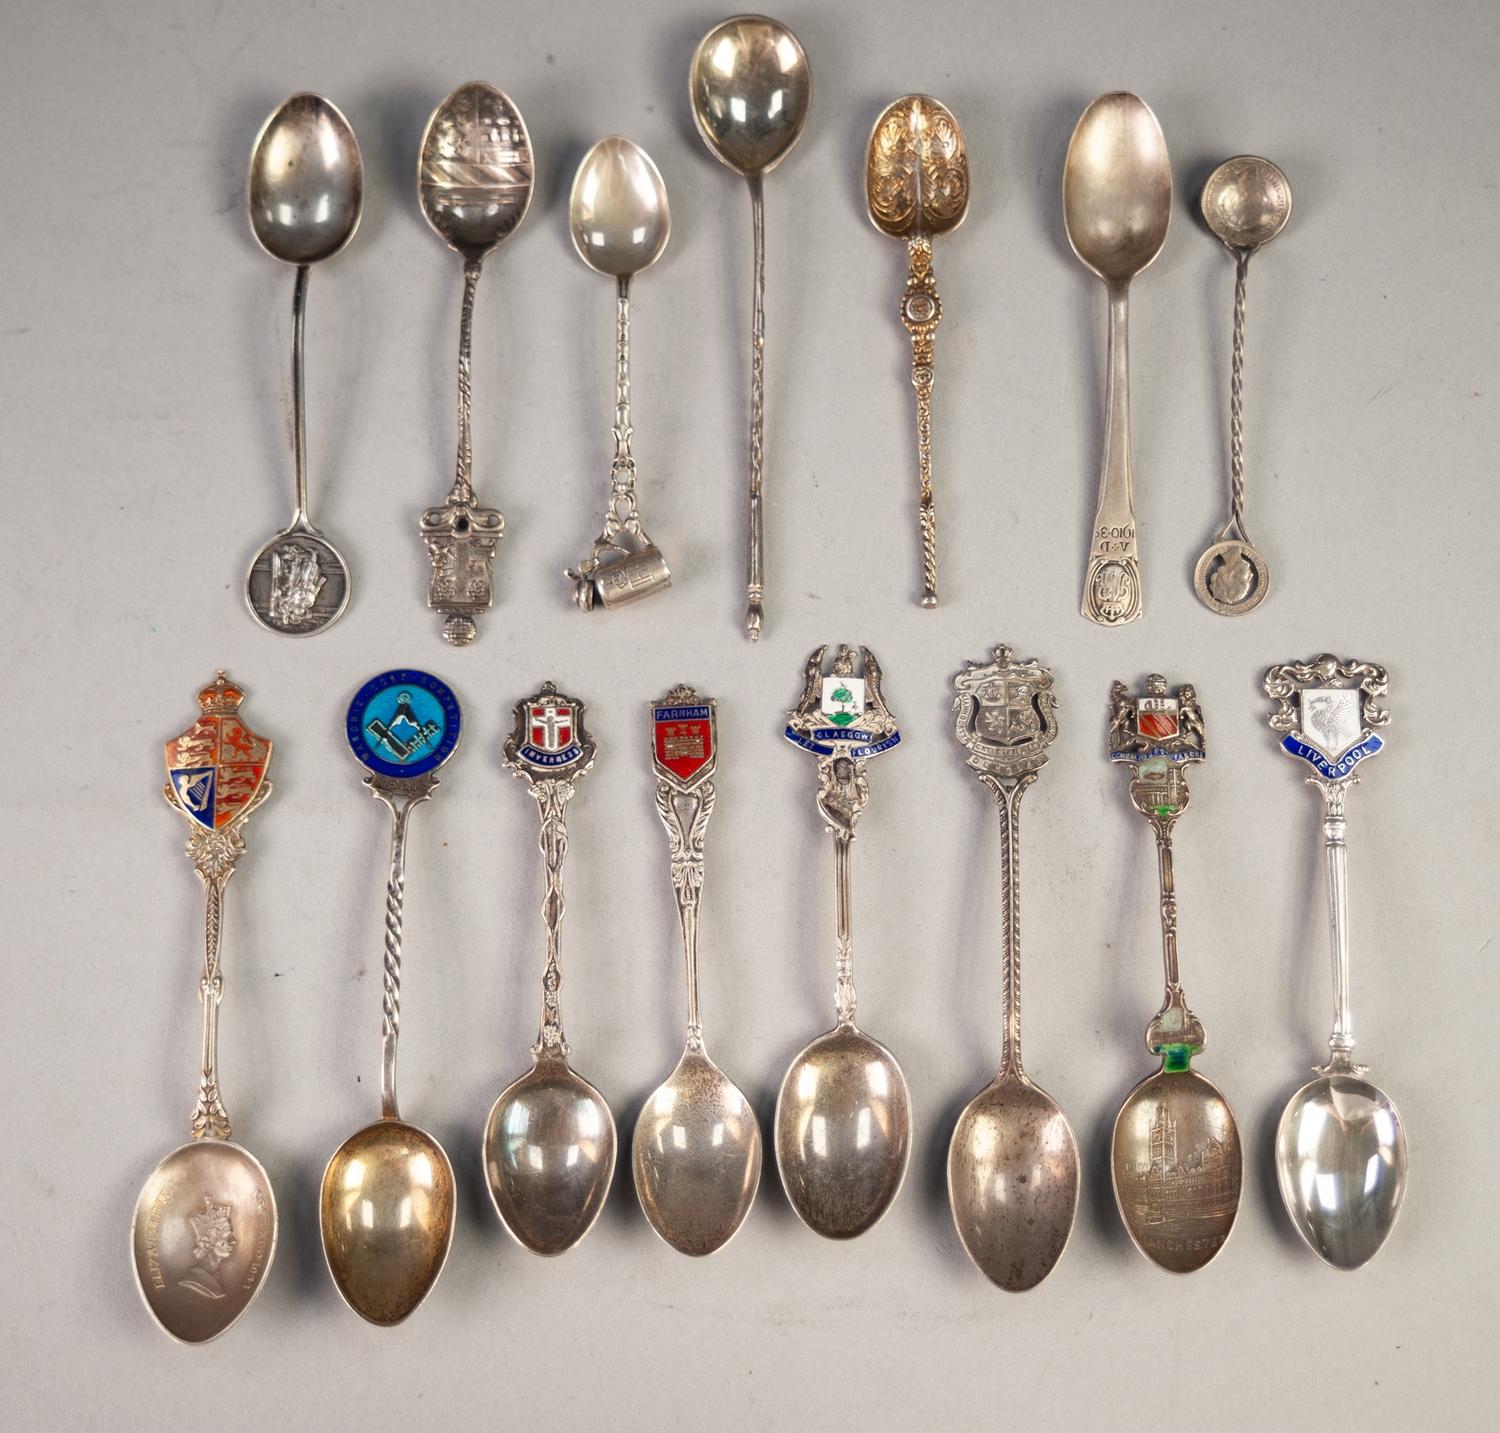 EIGHT SILVER AND ENAMEL SOUVENIR SPOONS includes 1953 Coronation example the bowl showing bust of